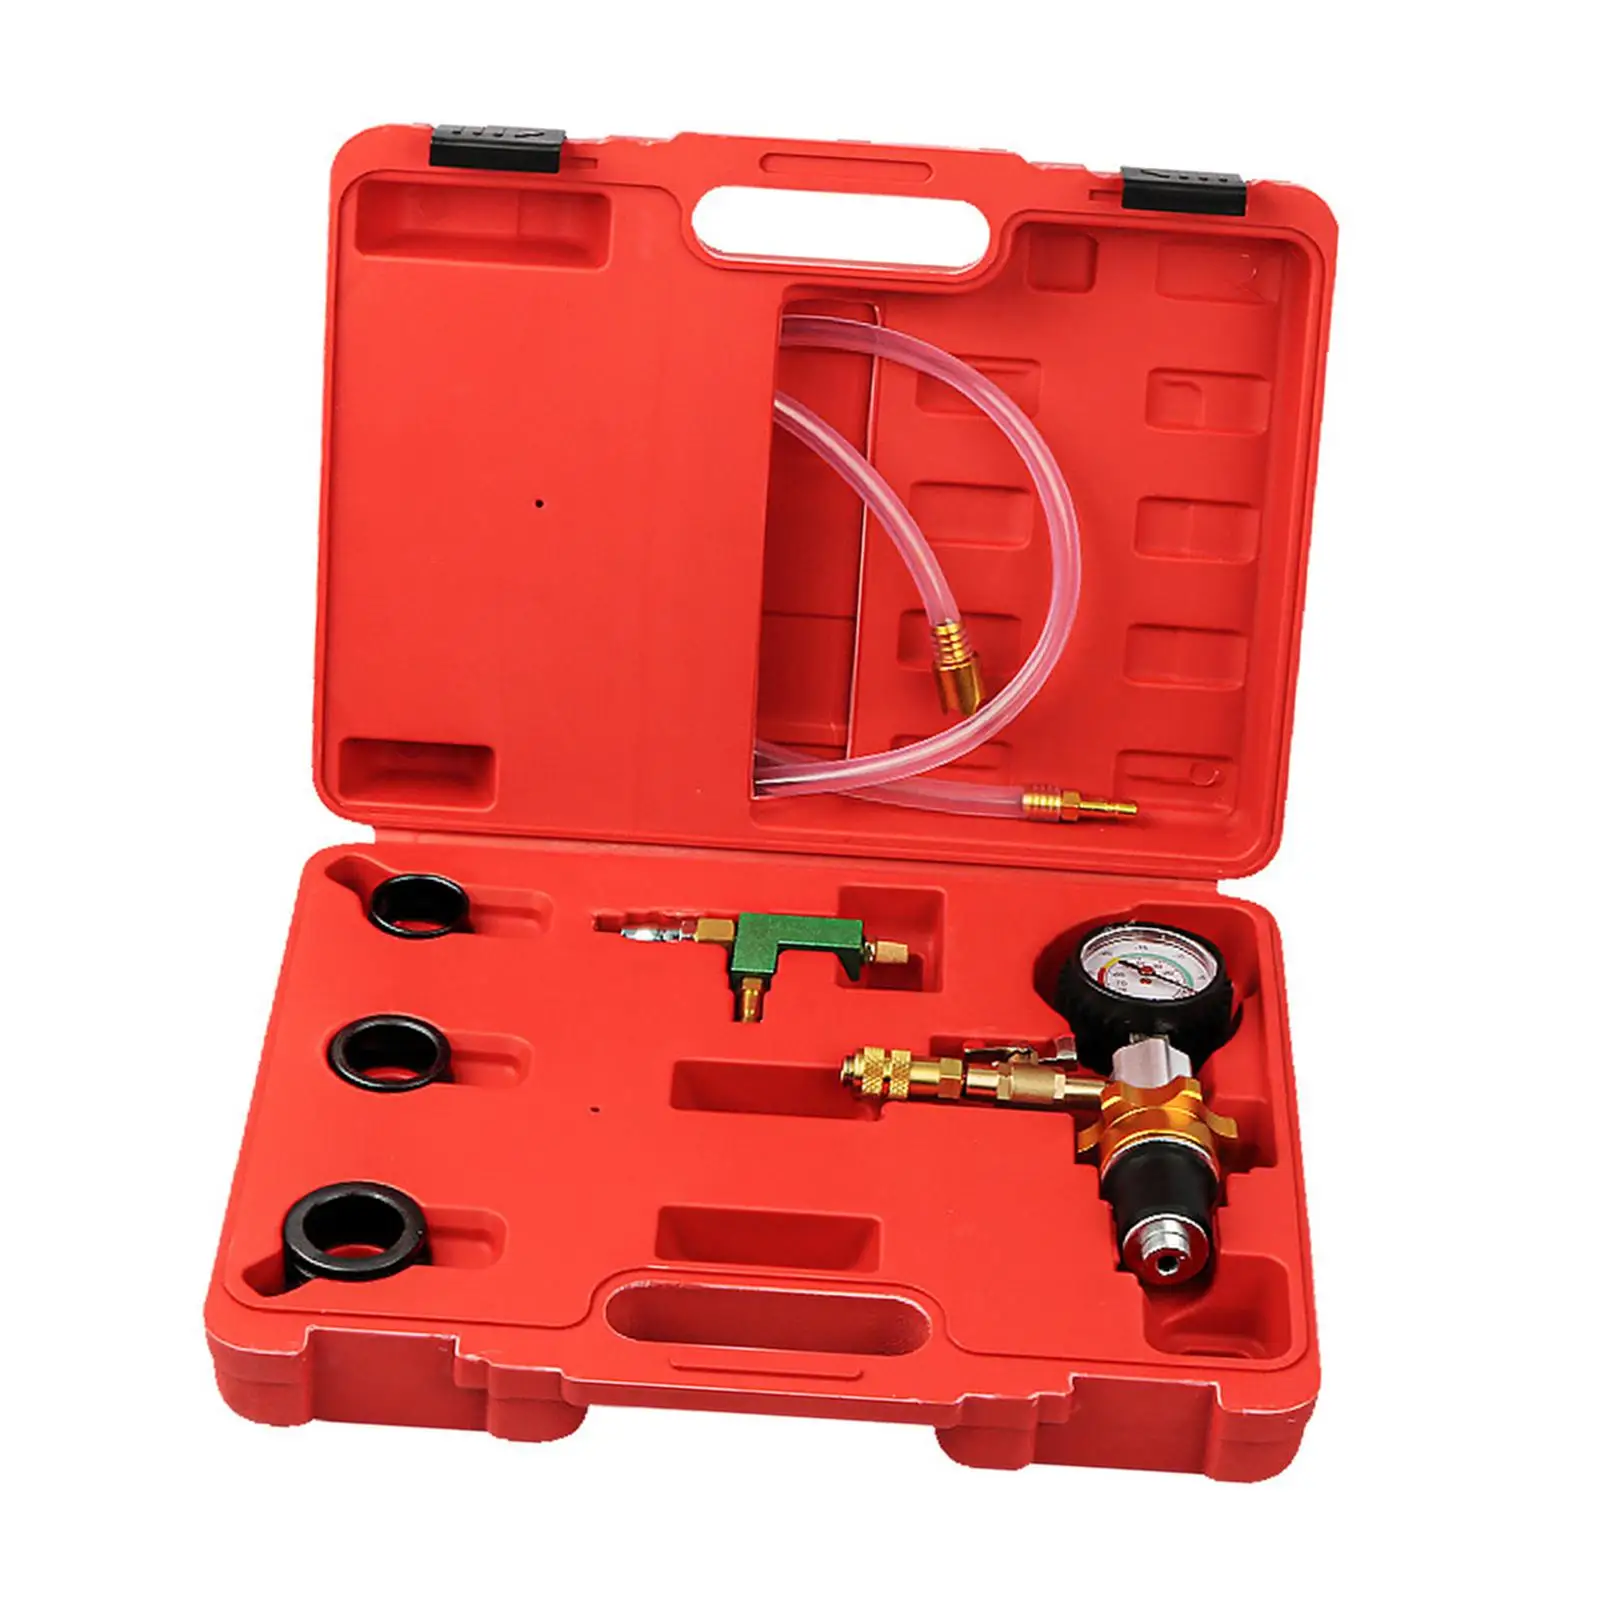 Vacuum Coolant Refill Tool set Brass Connector Leak Tester for Vehicle